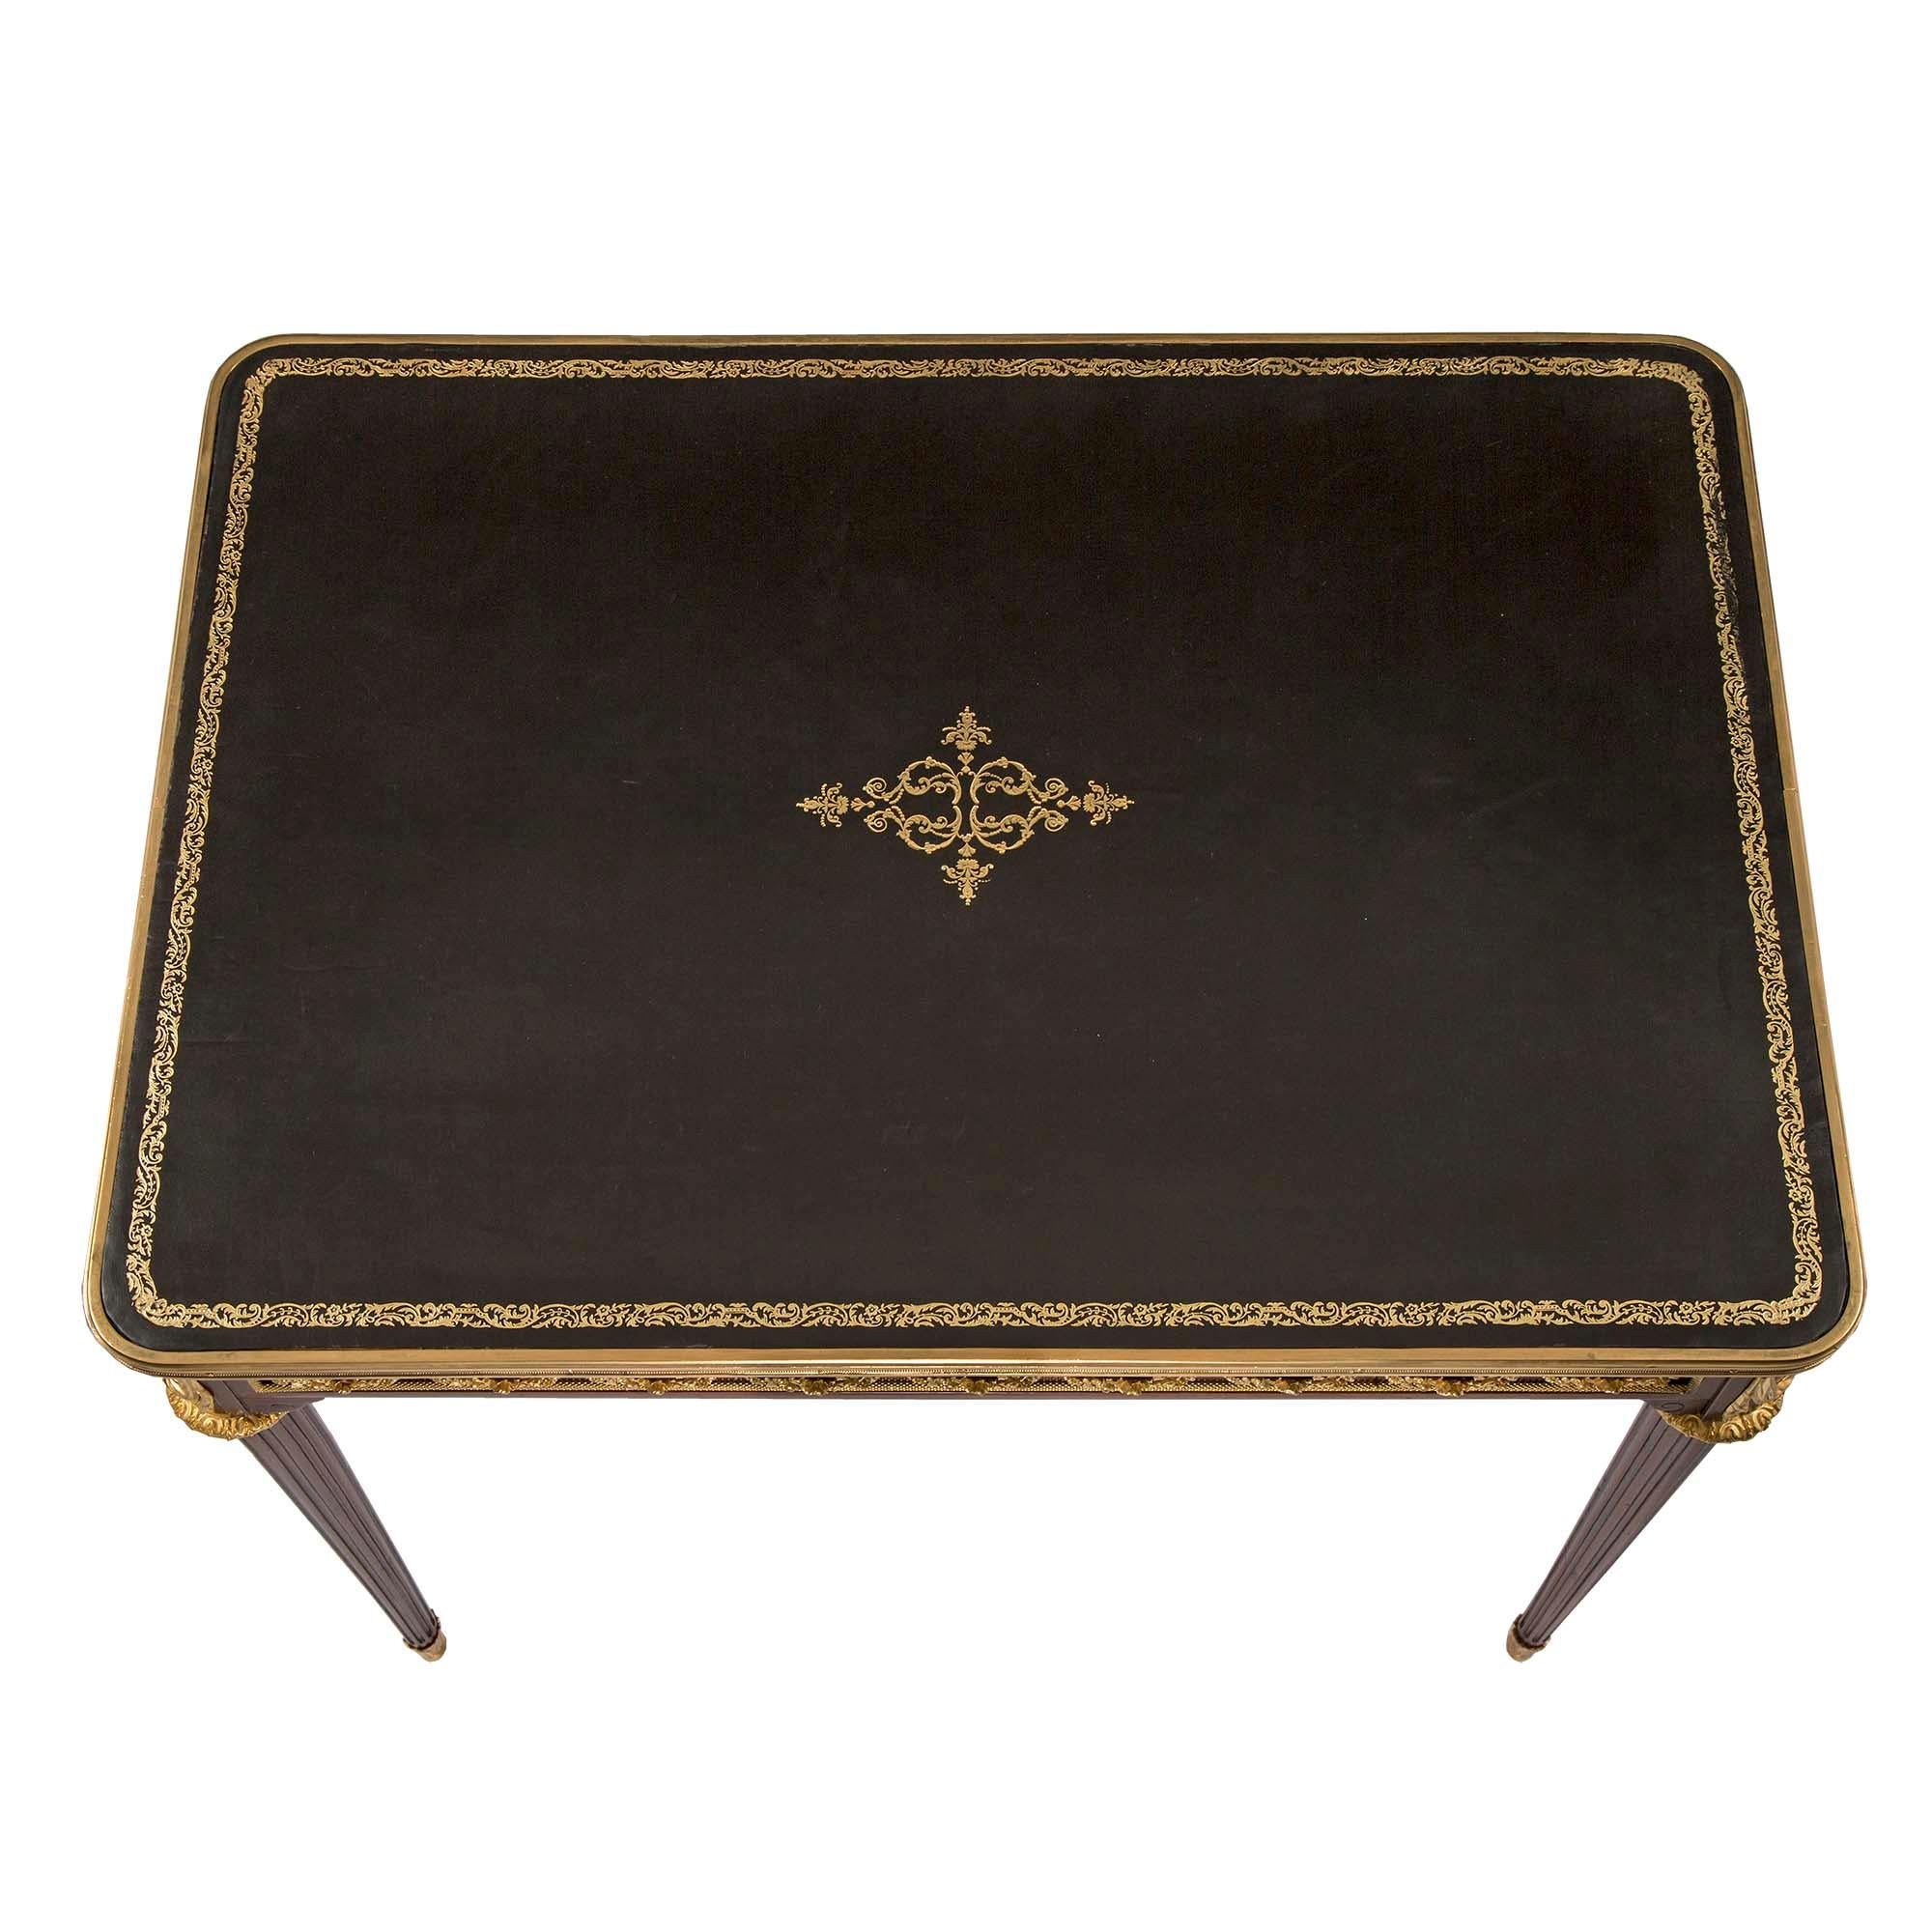 A most elegant French 19th century Louis XVI St. mahogany and ormolu writing desk, attributed to F. Linke. The lovely desk is raised by circular tapered fluted legs with fine foliate wraparound ormolu sabots and rich decorative ormolu top caps, in a